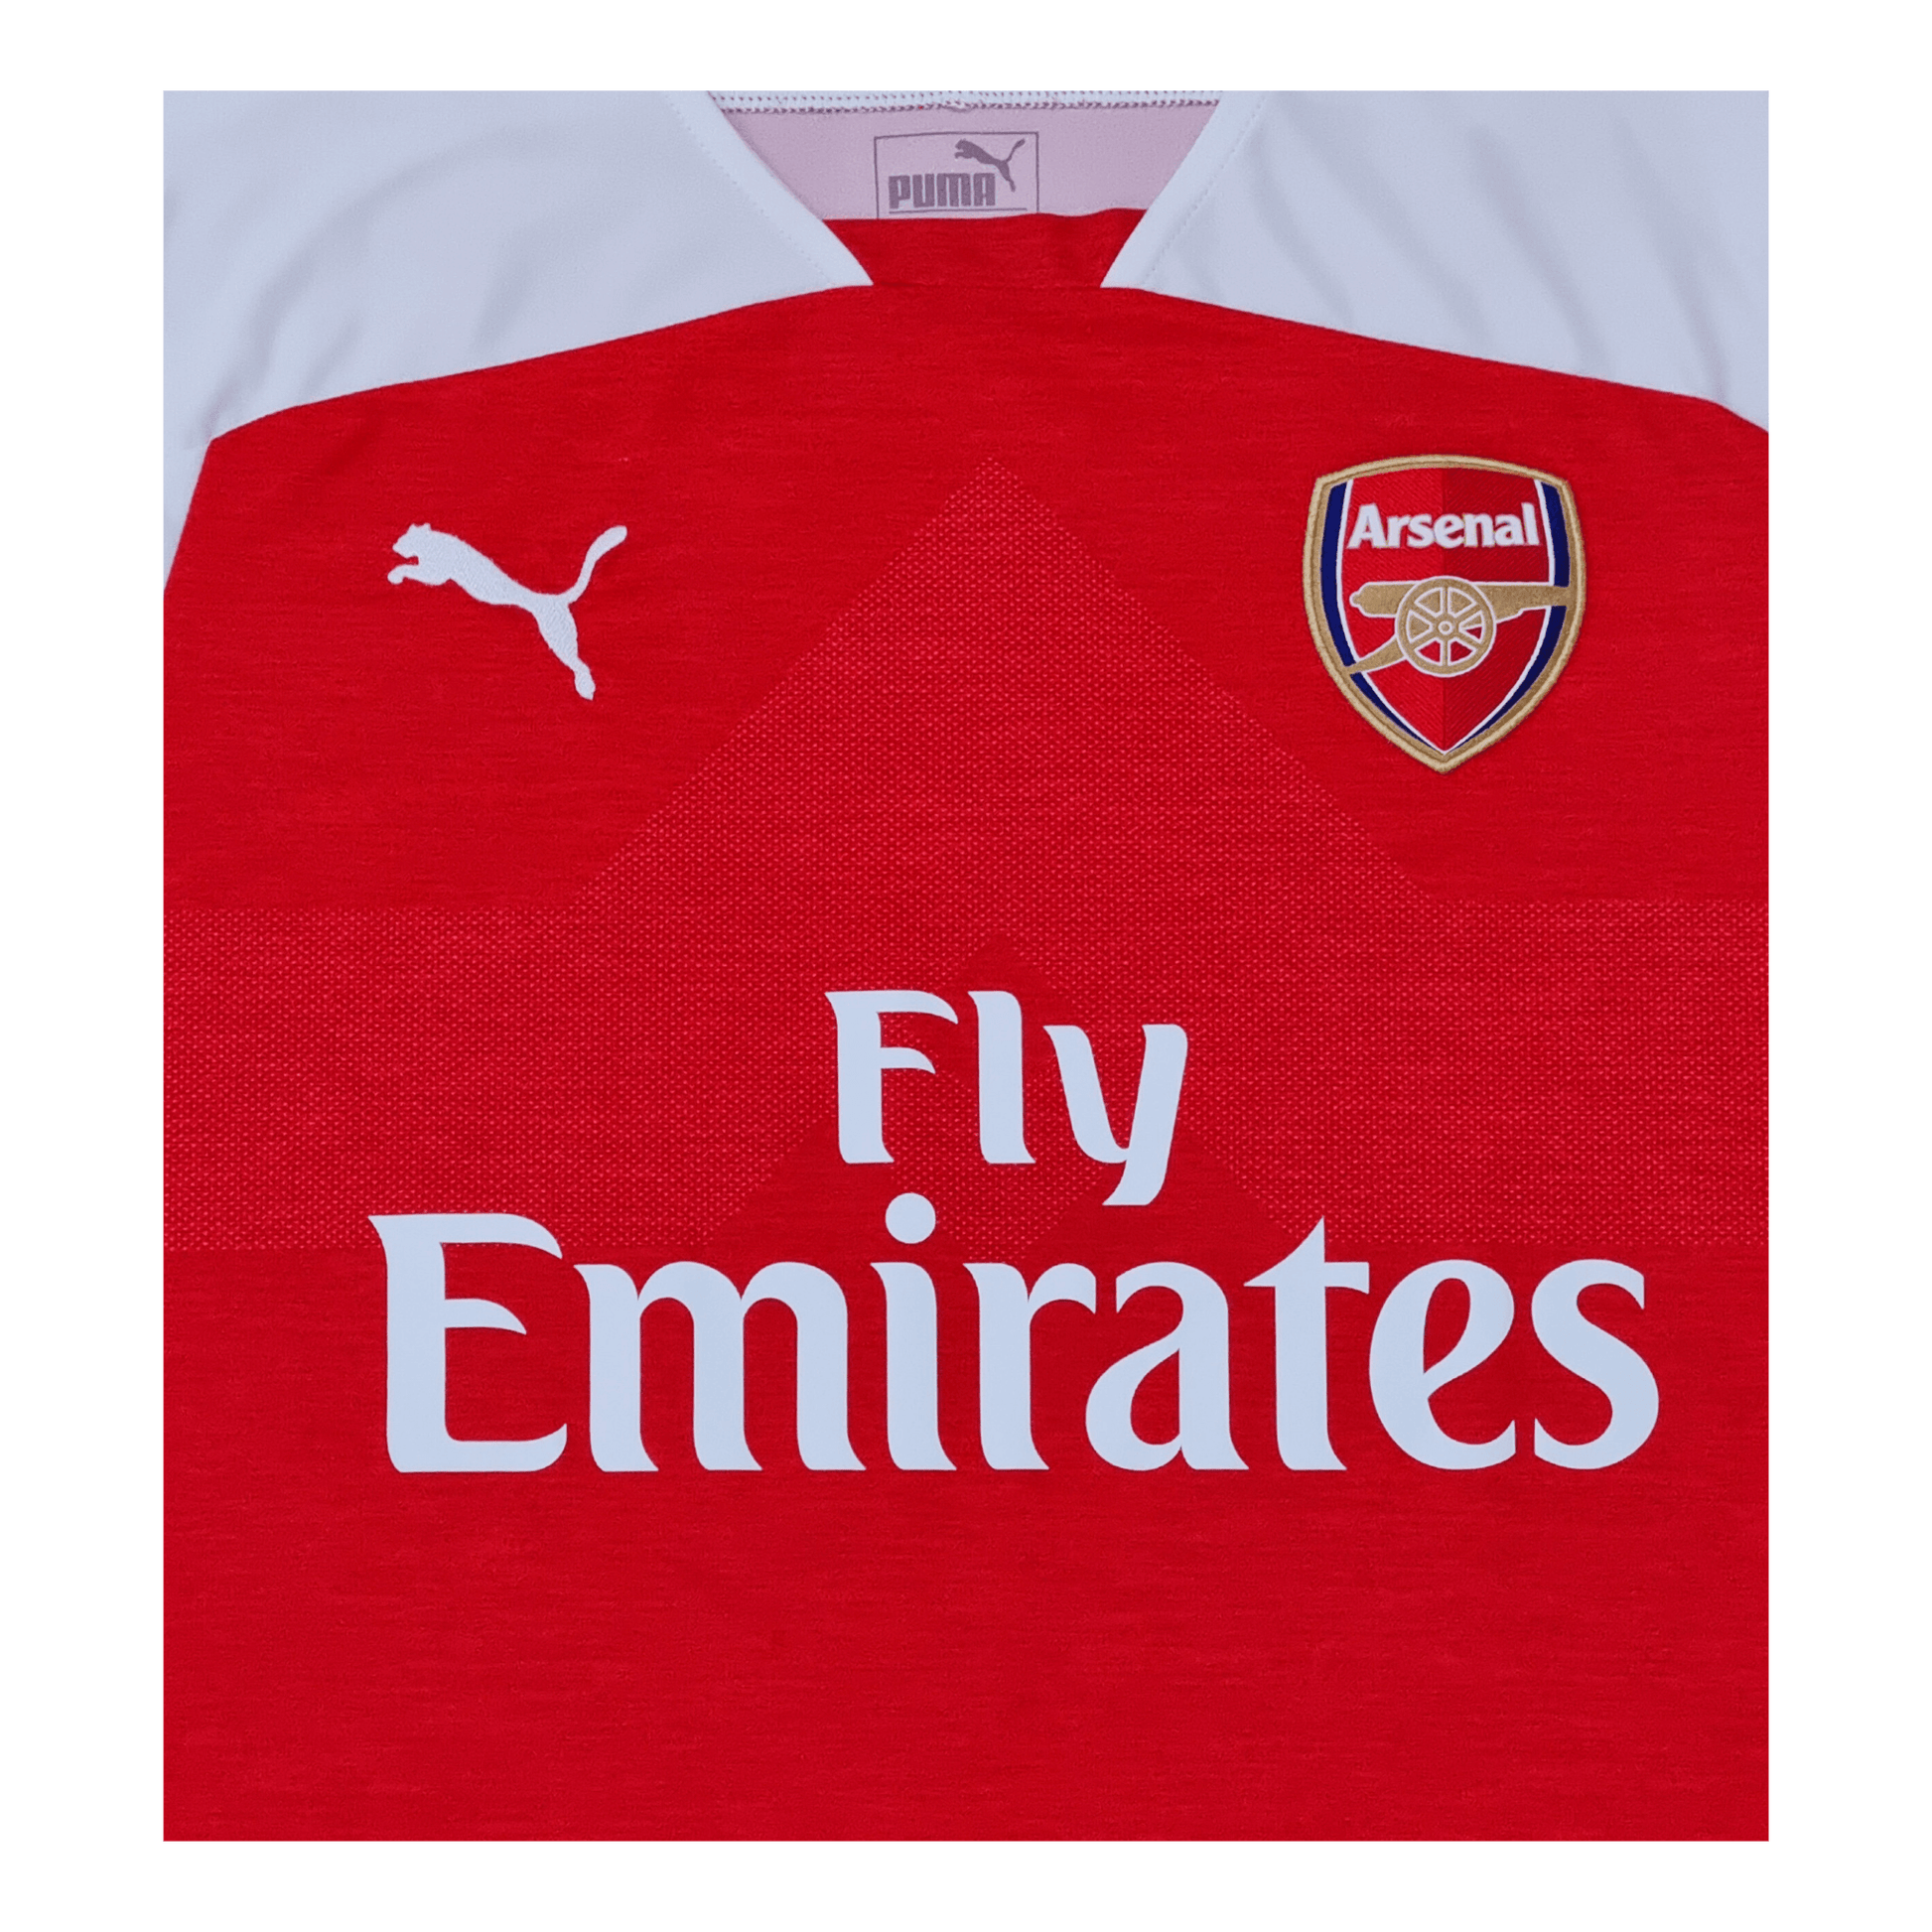 Arsenal 2018/19 Home Jersey Pink, White & Red - Front - Fly Emirates